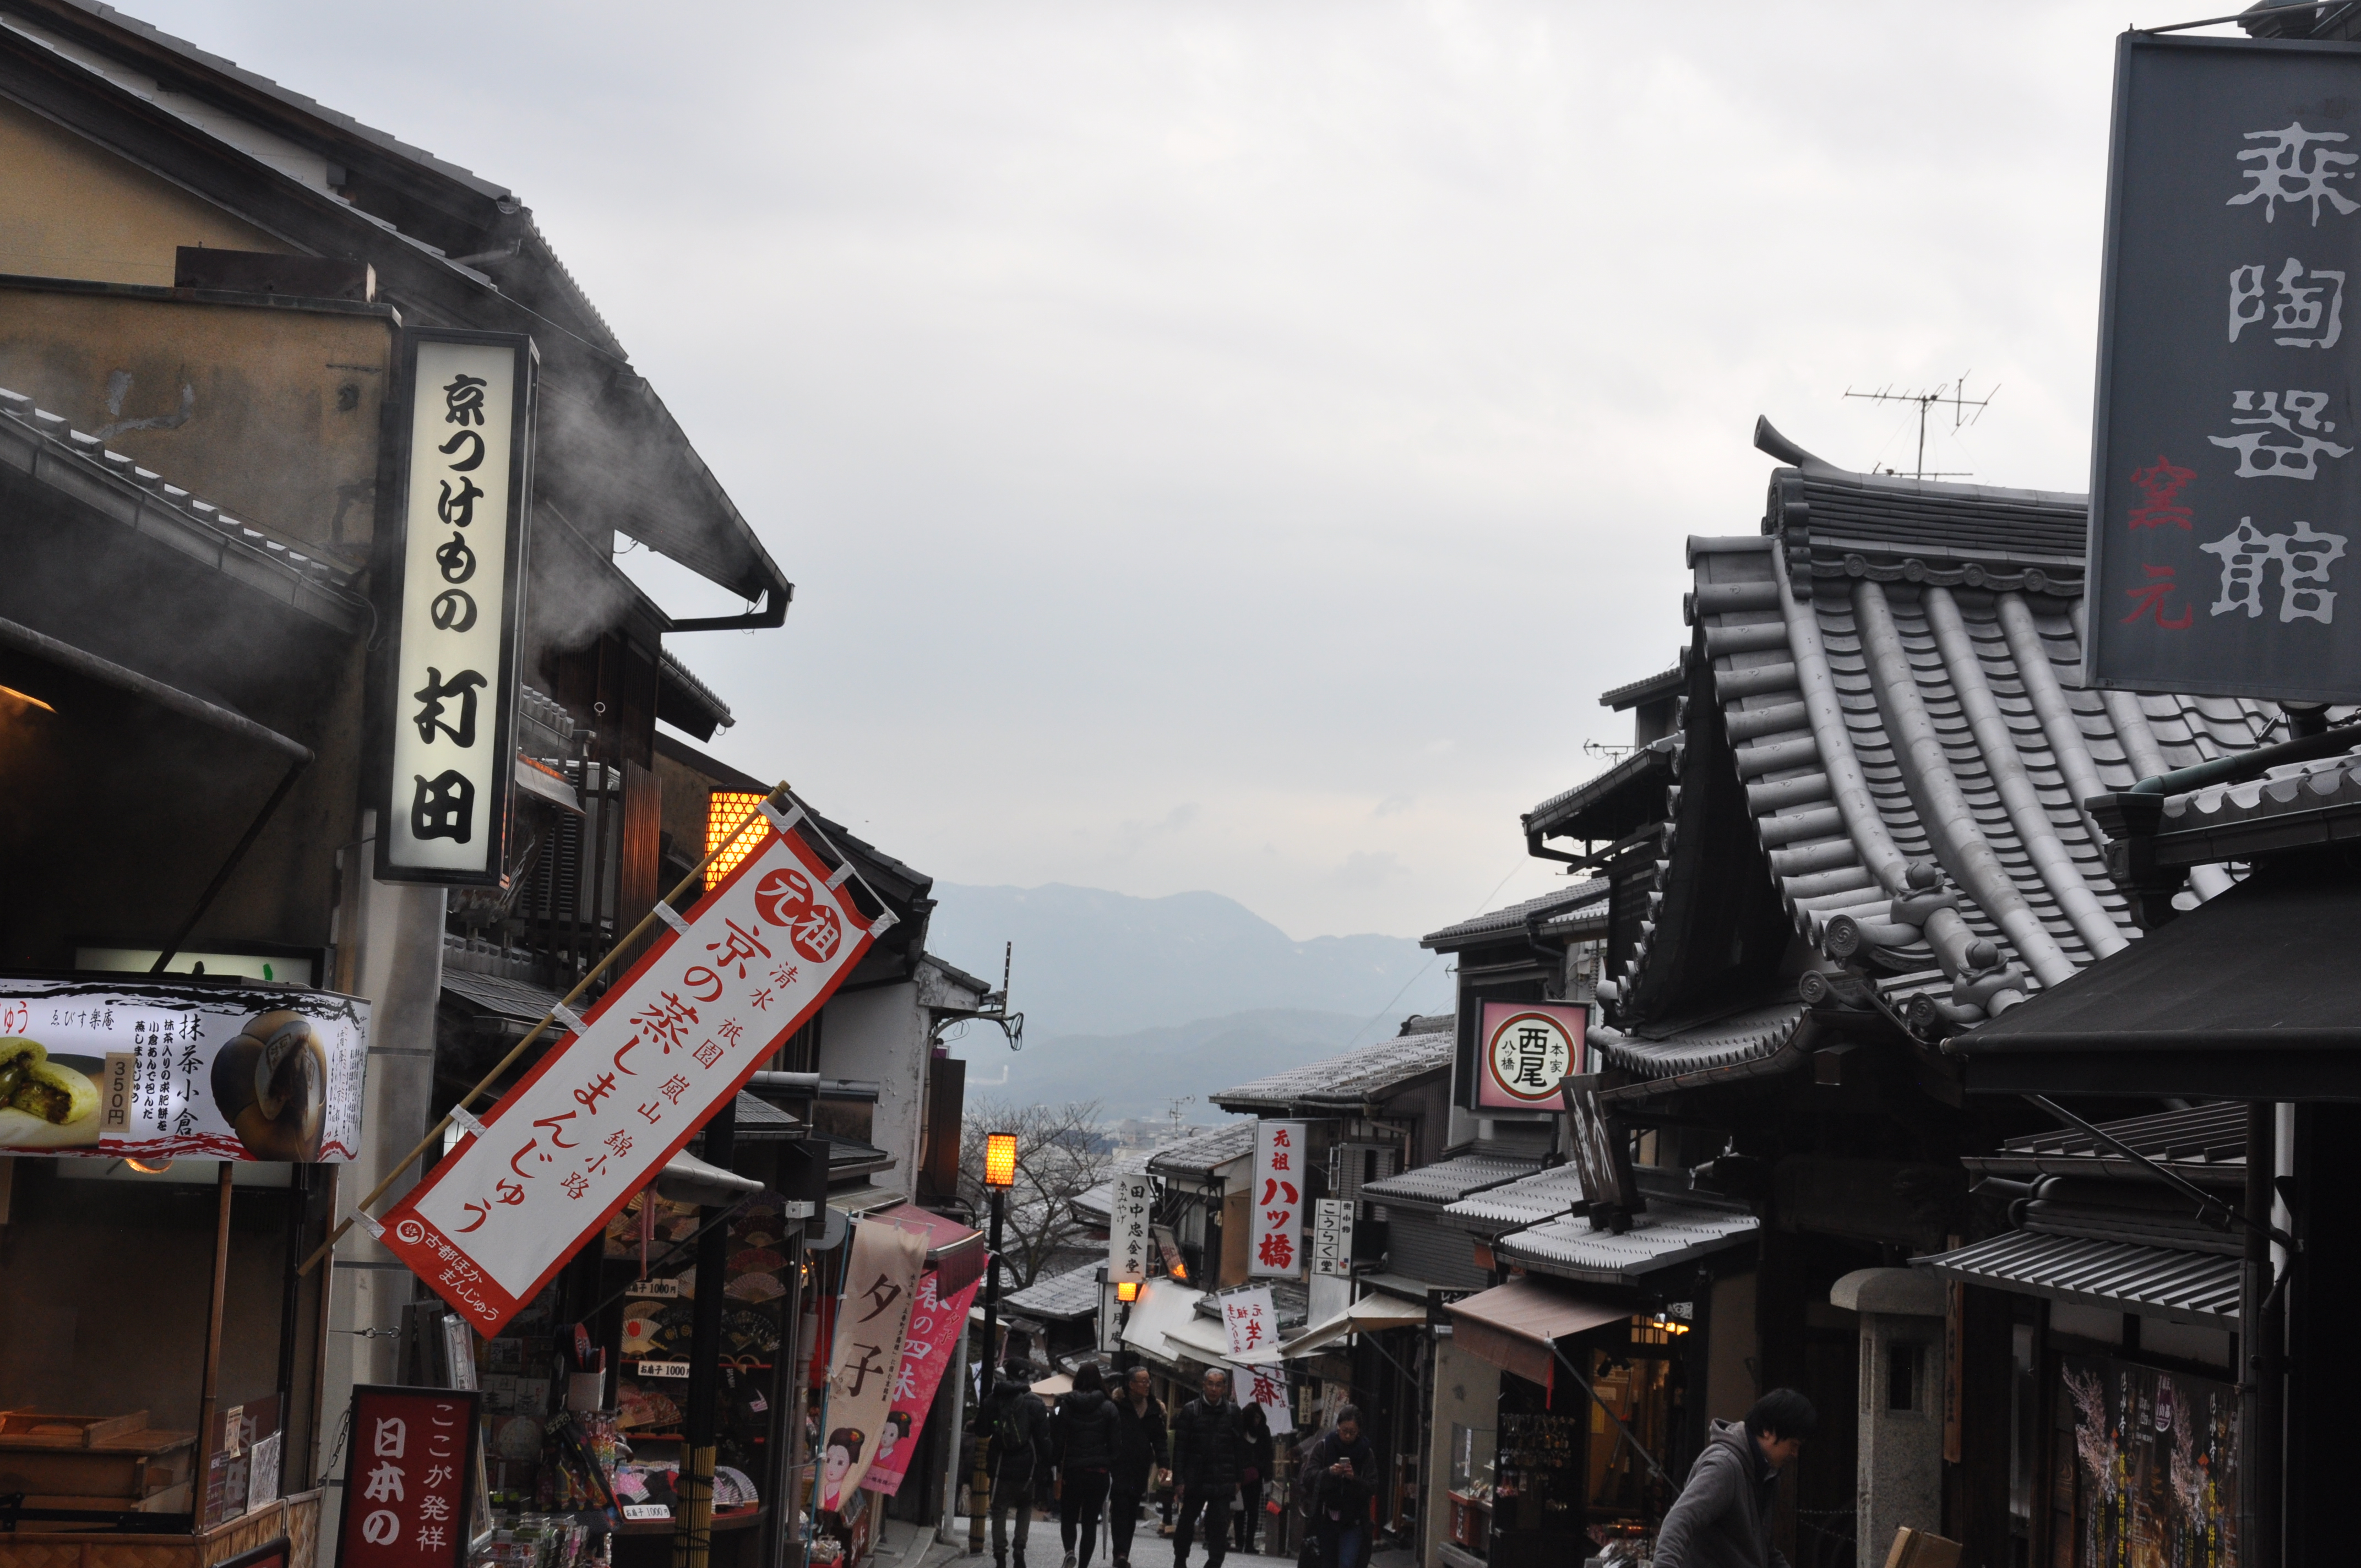 Higashiyama district is one of the best preserved historical district in Kyoto.